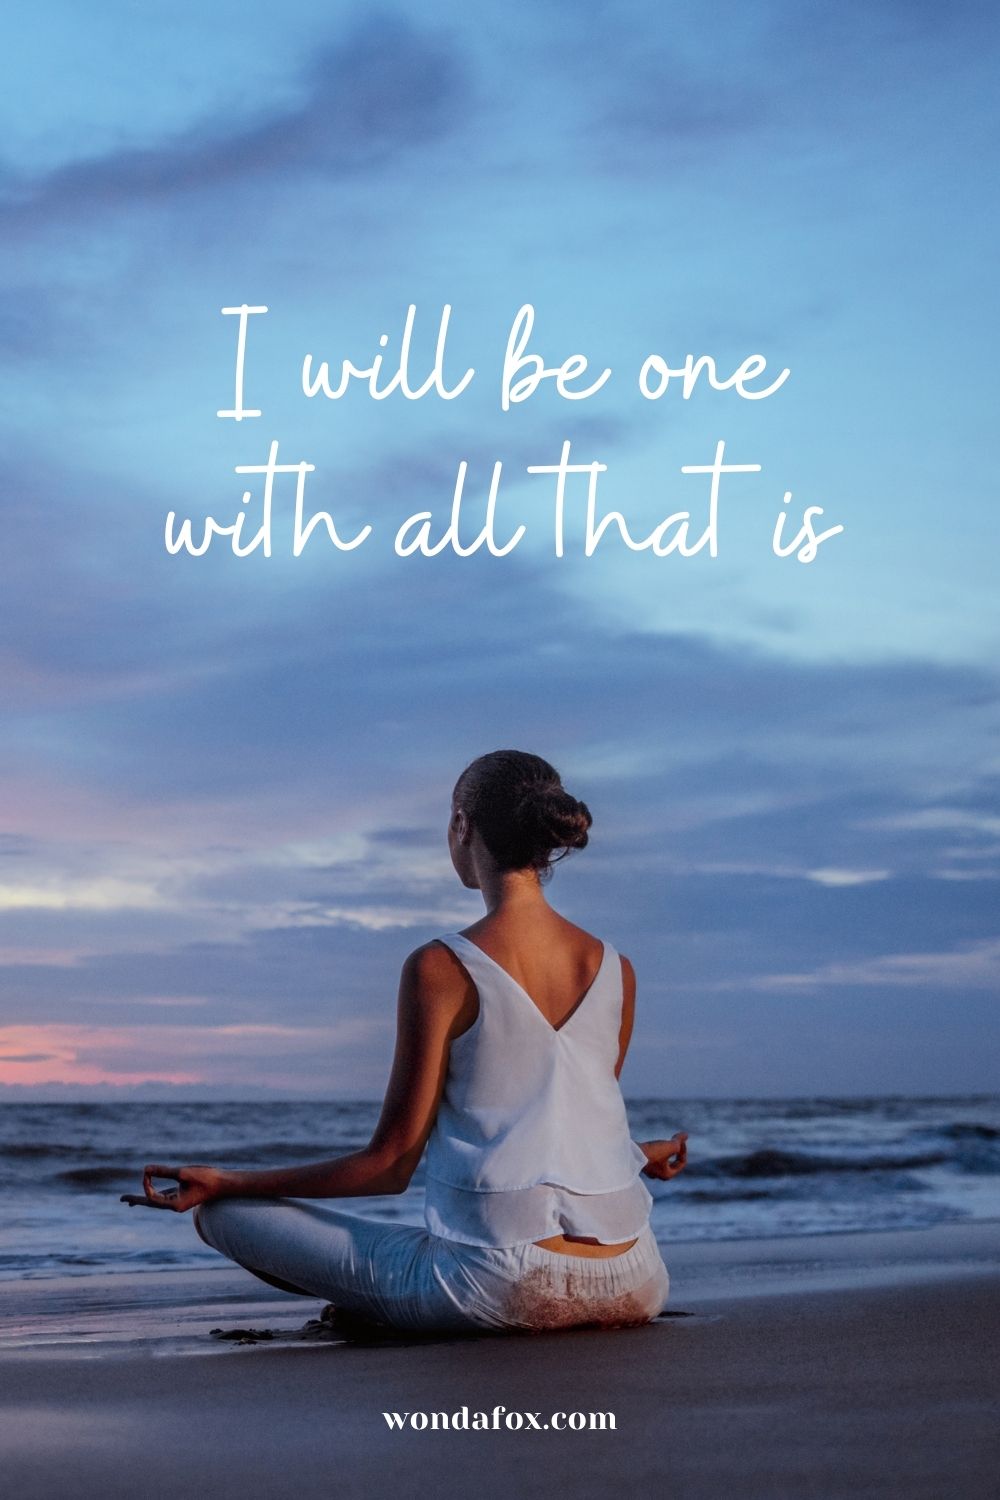 I will be one with all that is - mantras for new year